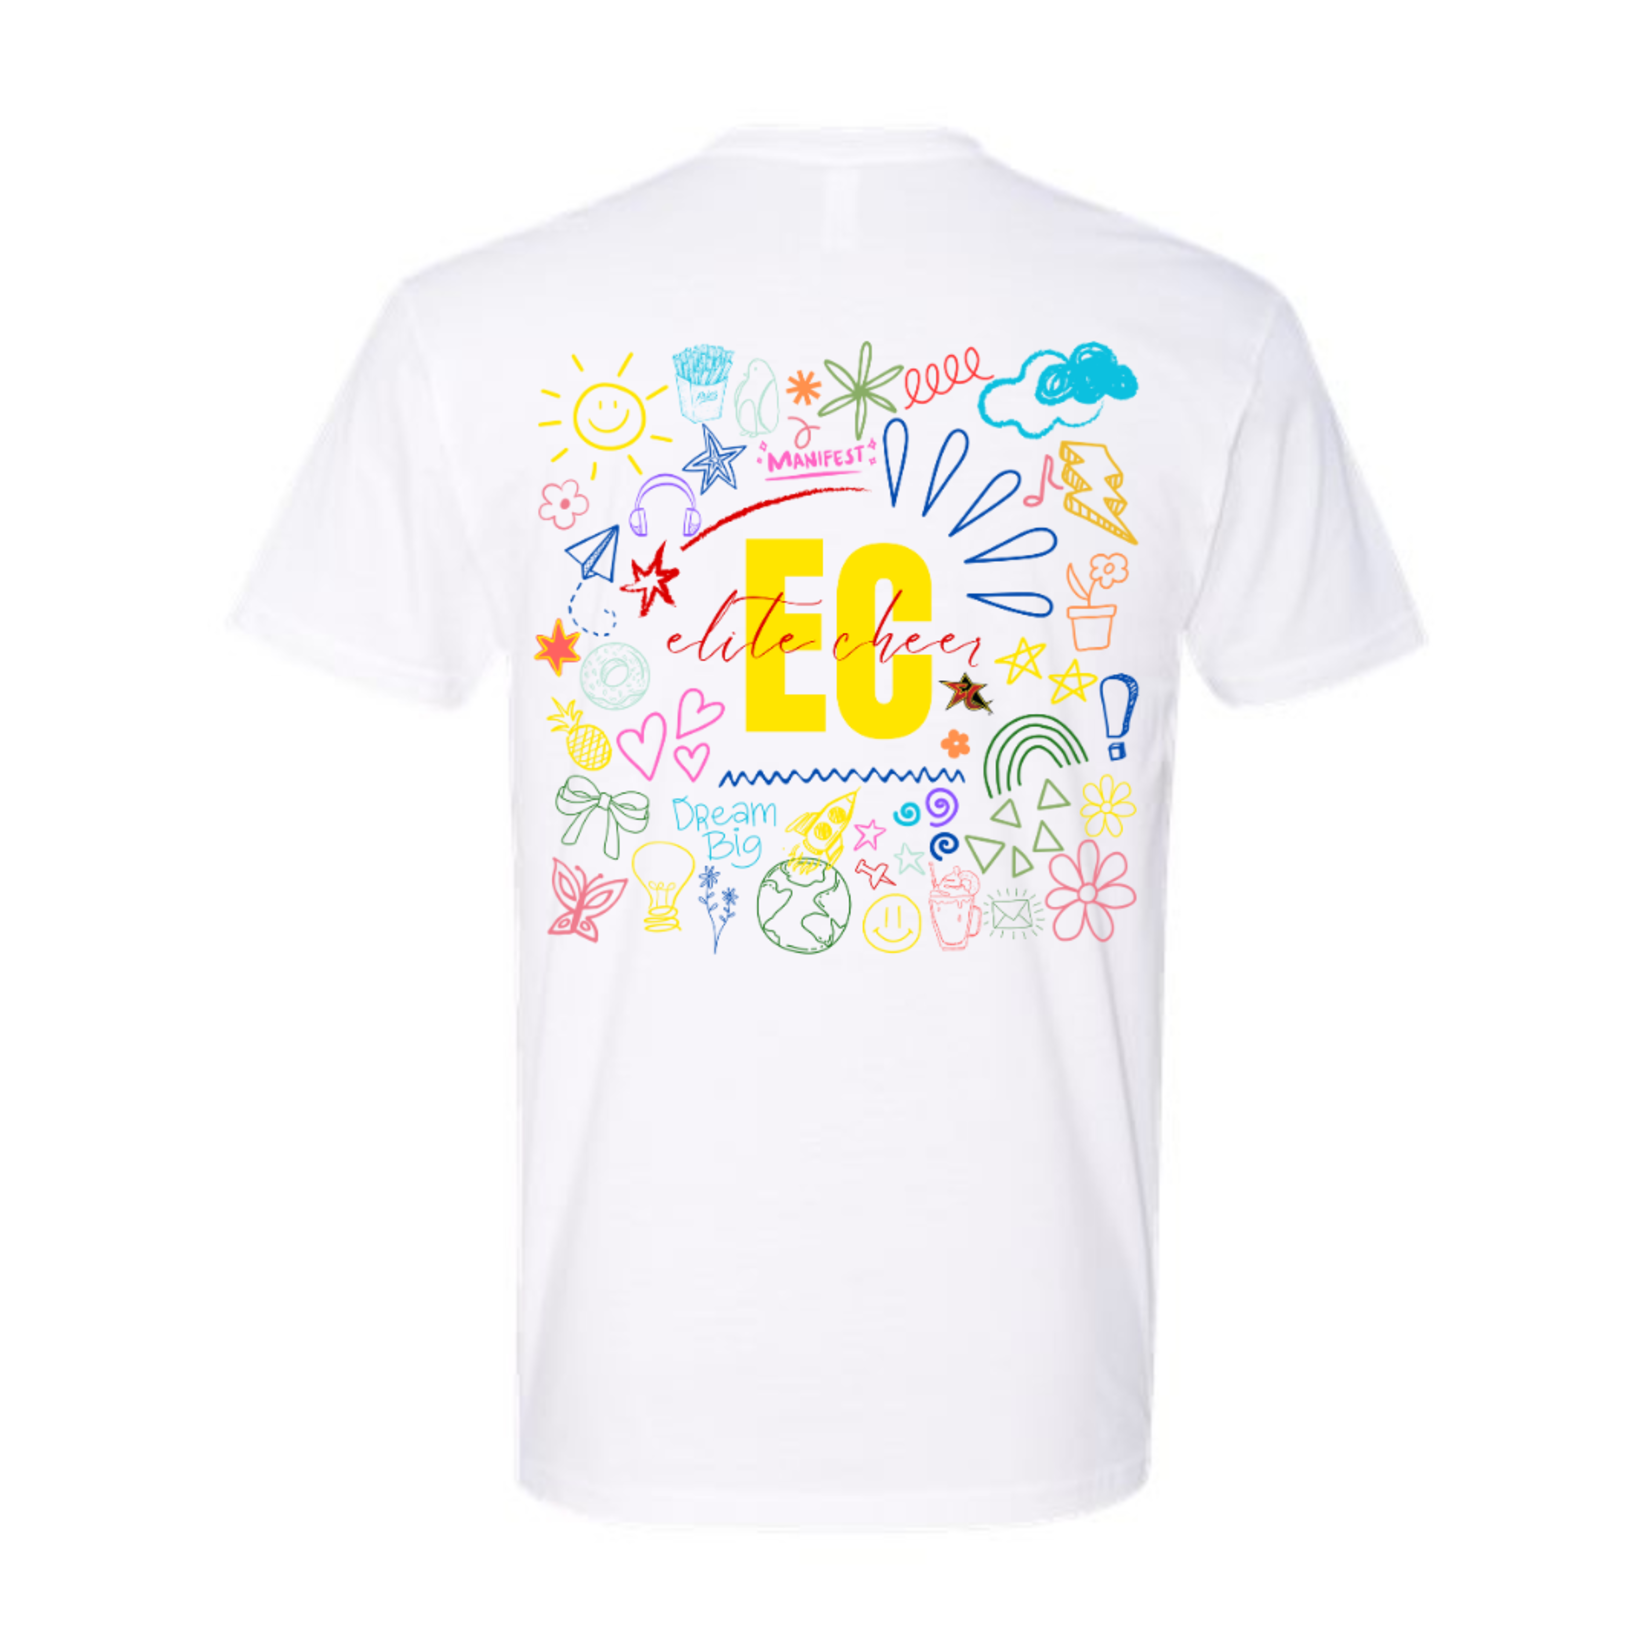 next level EC Doodle Adult & Youth Tee